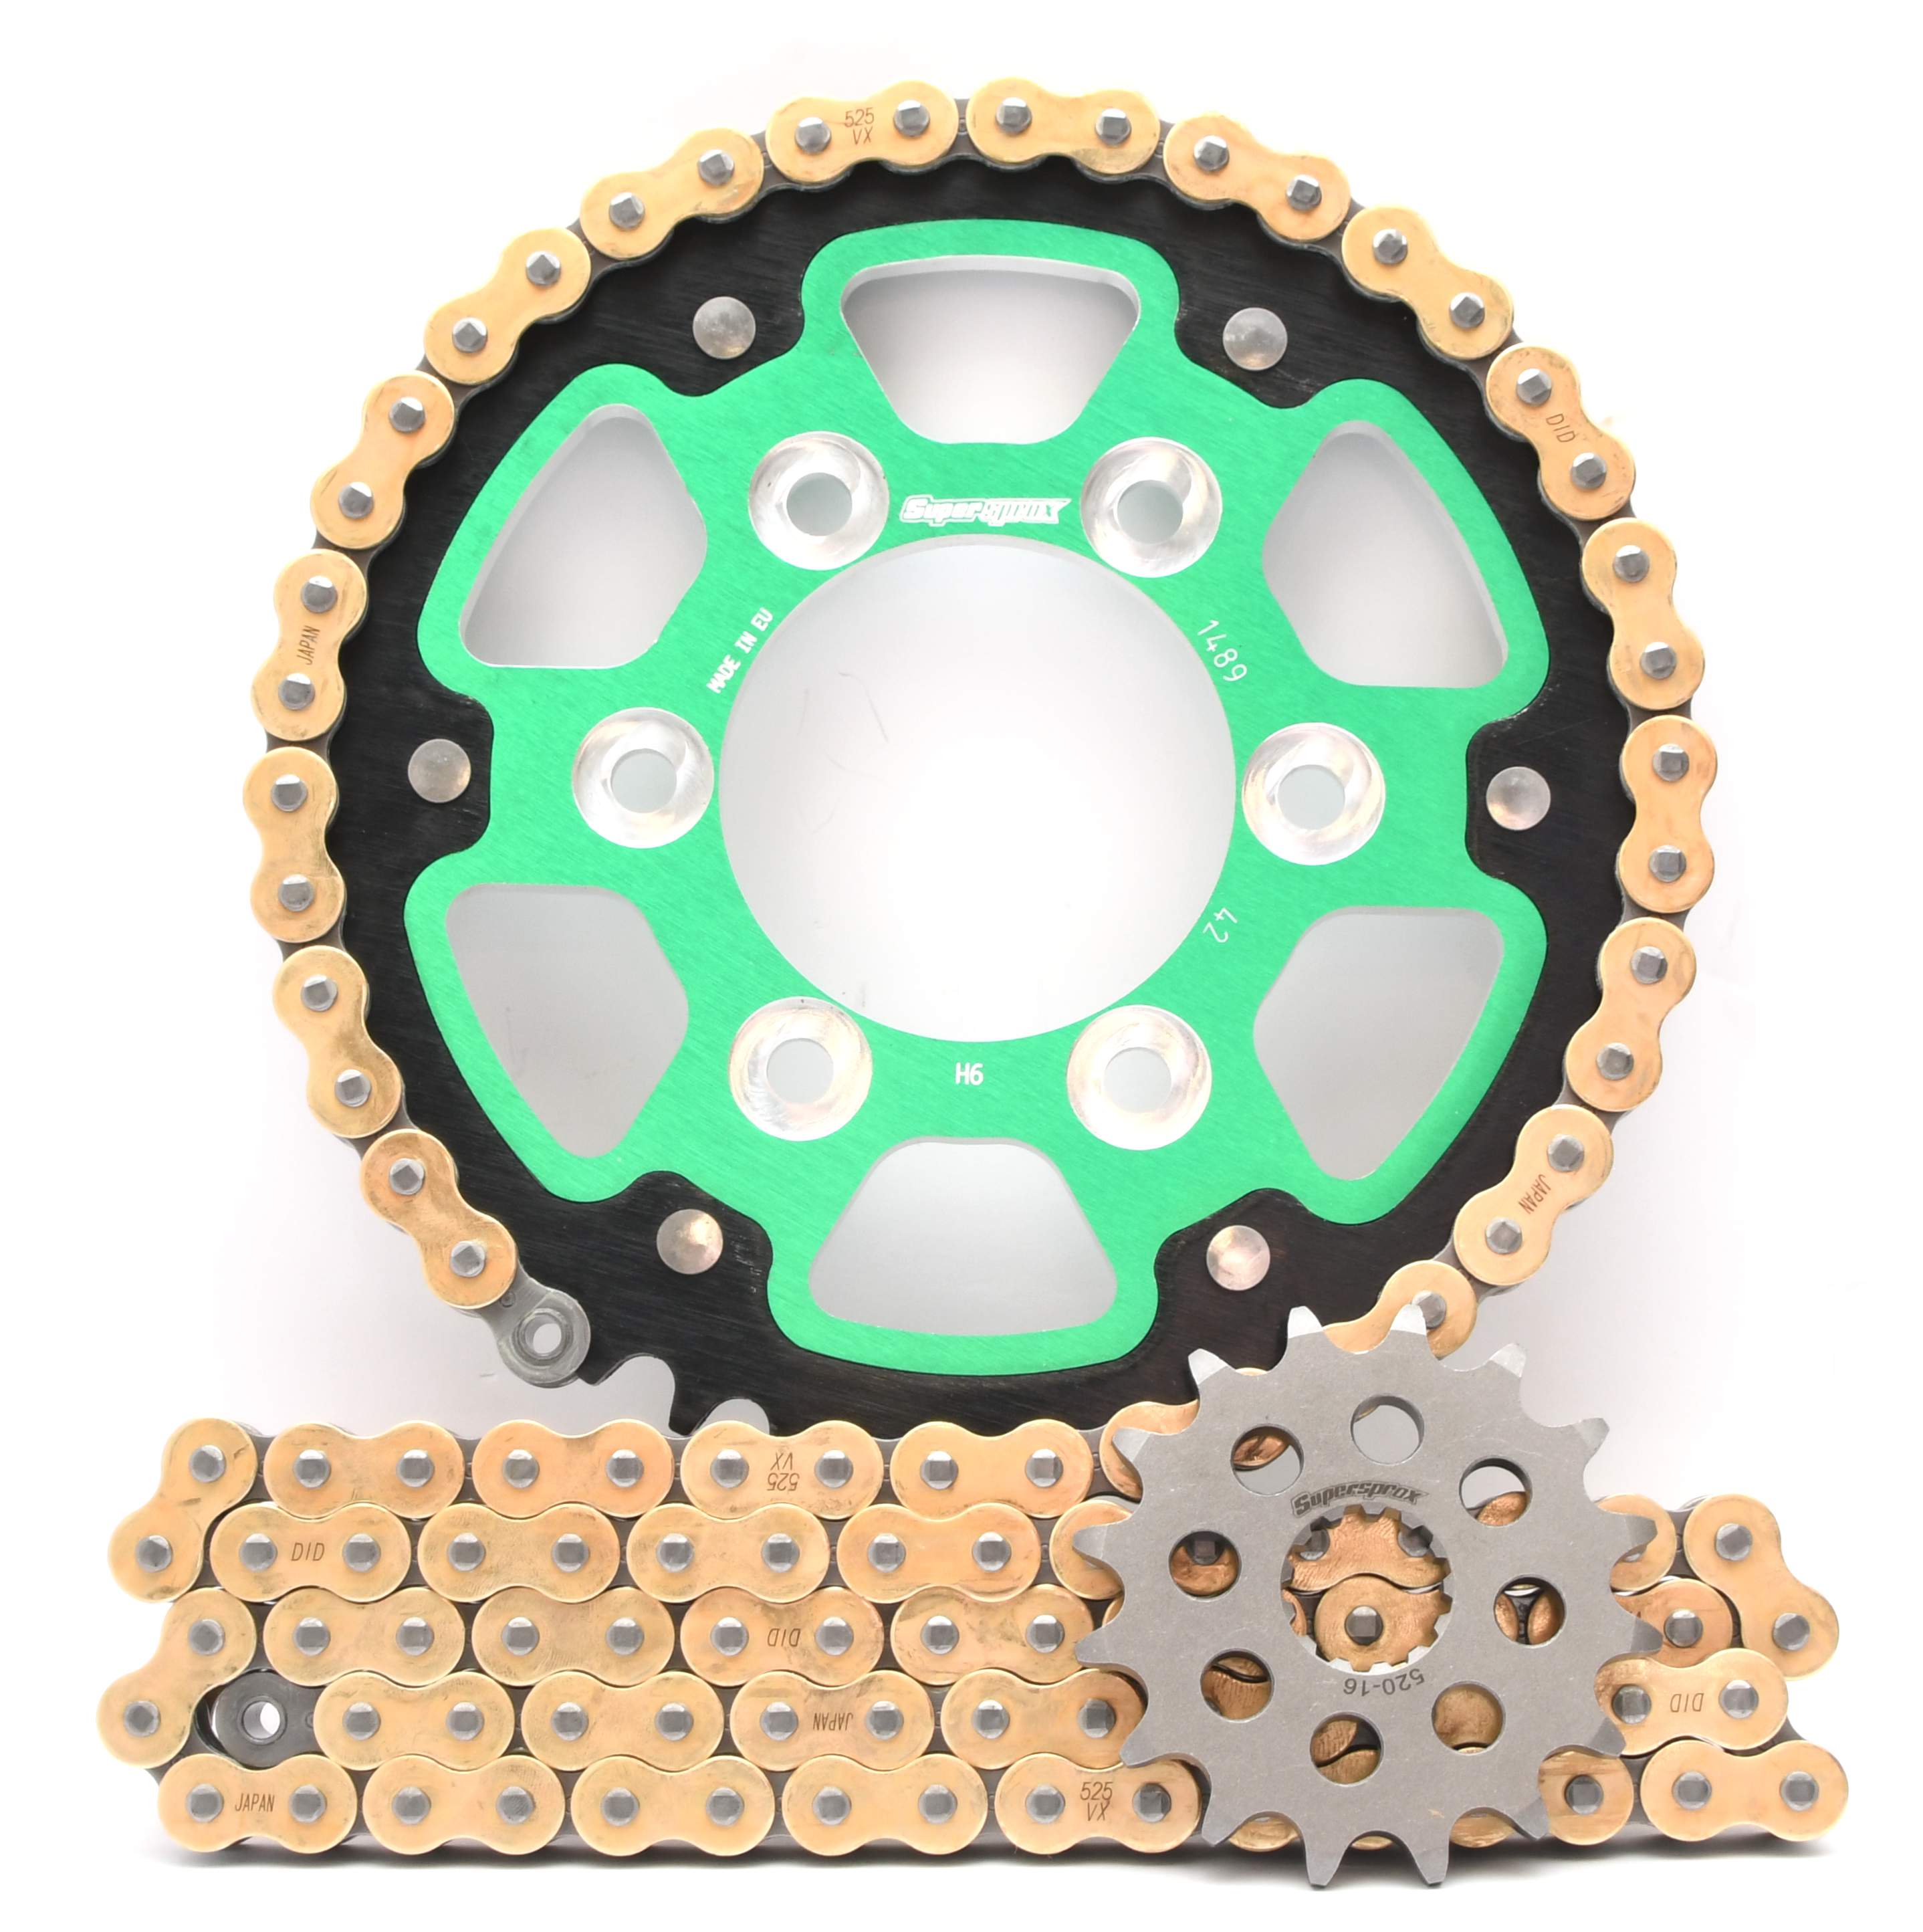 Supersprox Chain & Sprocket Kit for Kawasaki Z1000 - Choose Your Gearing